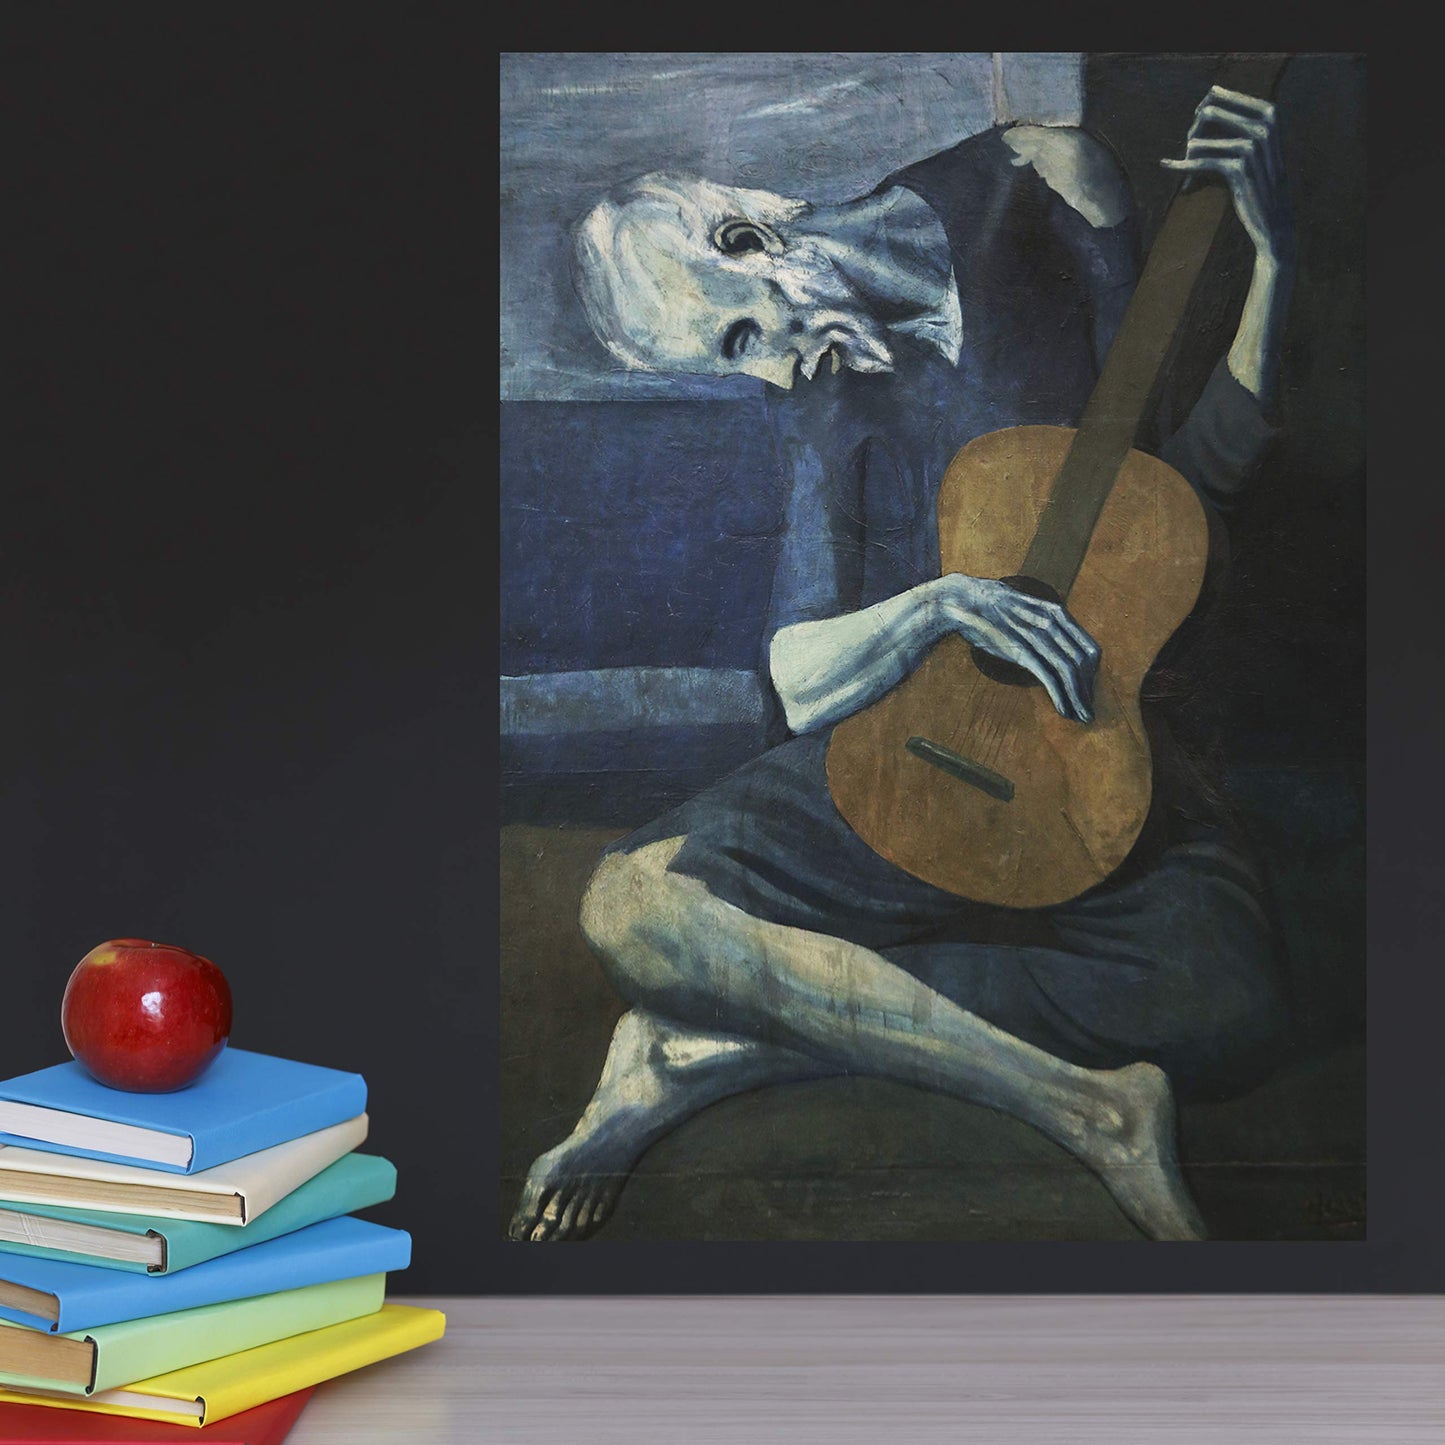 2 Pack - Van Gogh Skeleton & The Old Guitarist by Pablo Picasso Poster Print Set - Fine Art (Laminated, 18" x 24")